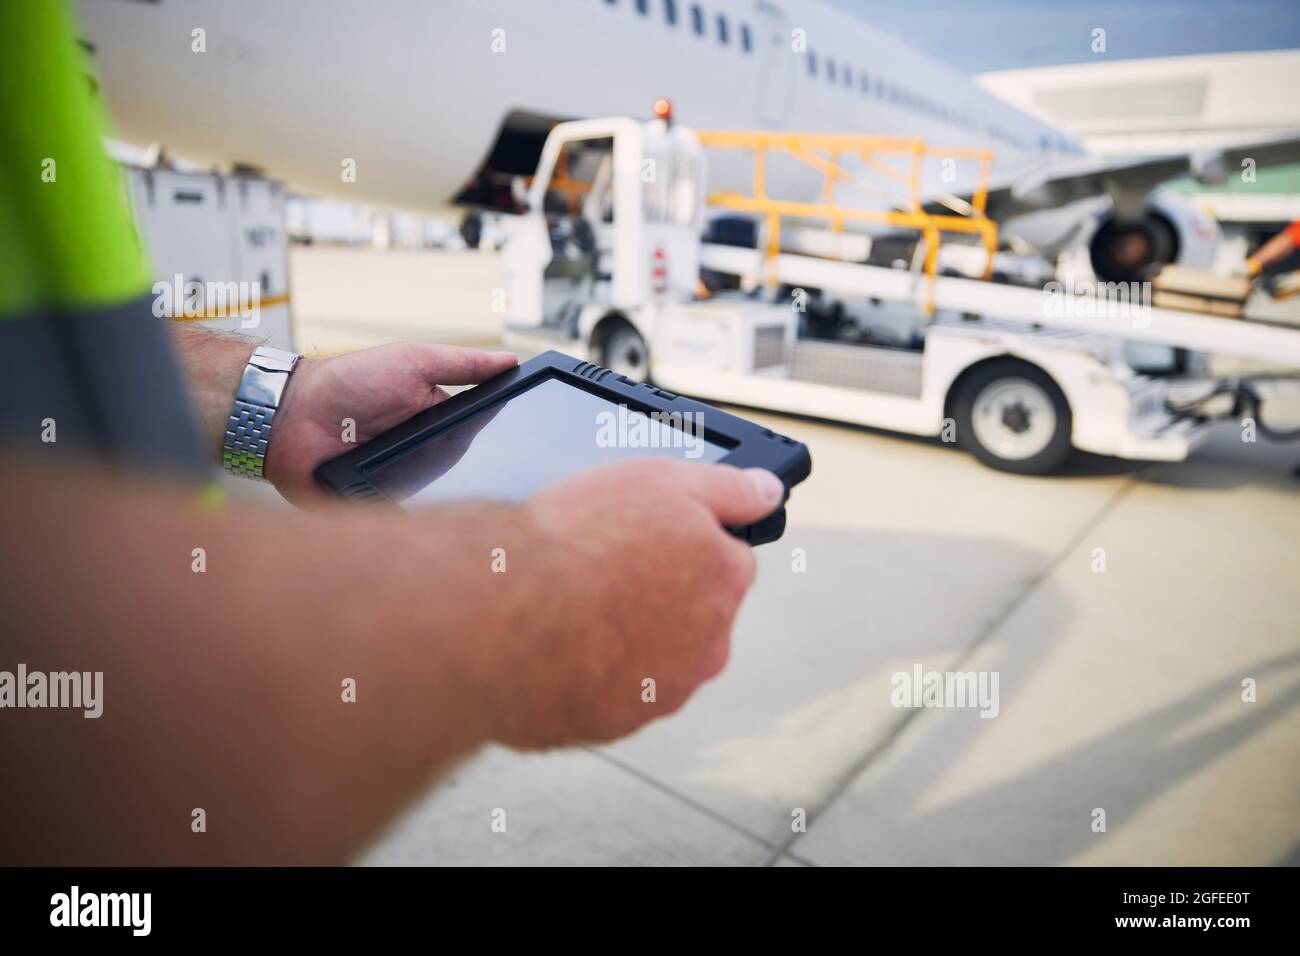 Member of ground staff preparing passenger airplane before flight. Worker using tablet against plane at airport. Stock Photo